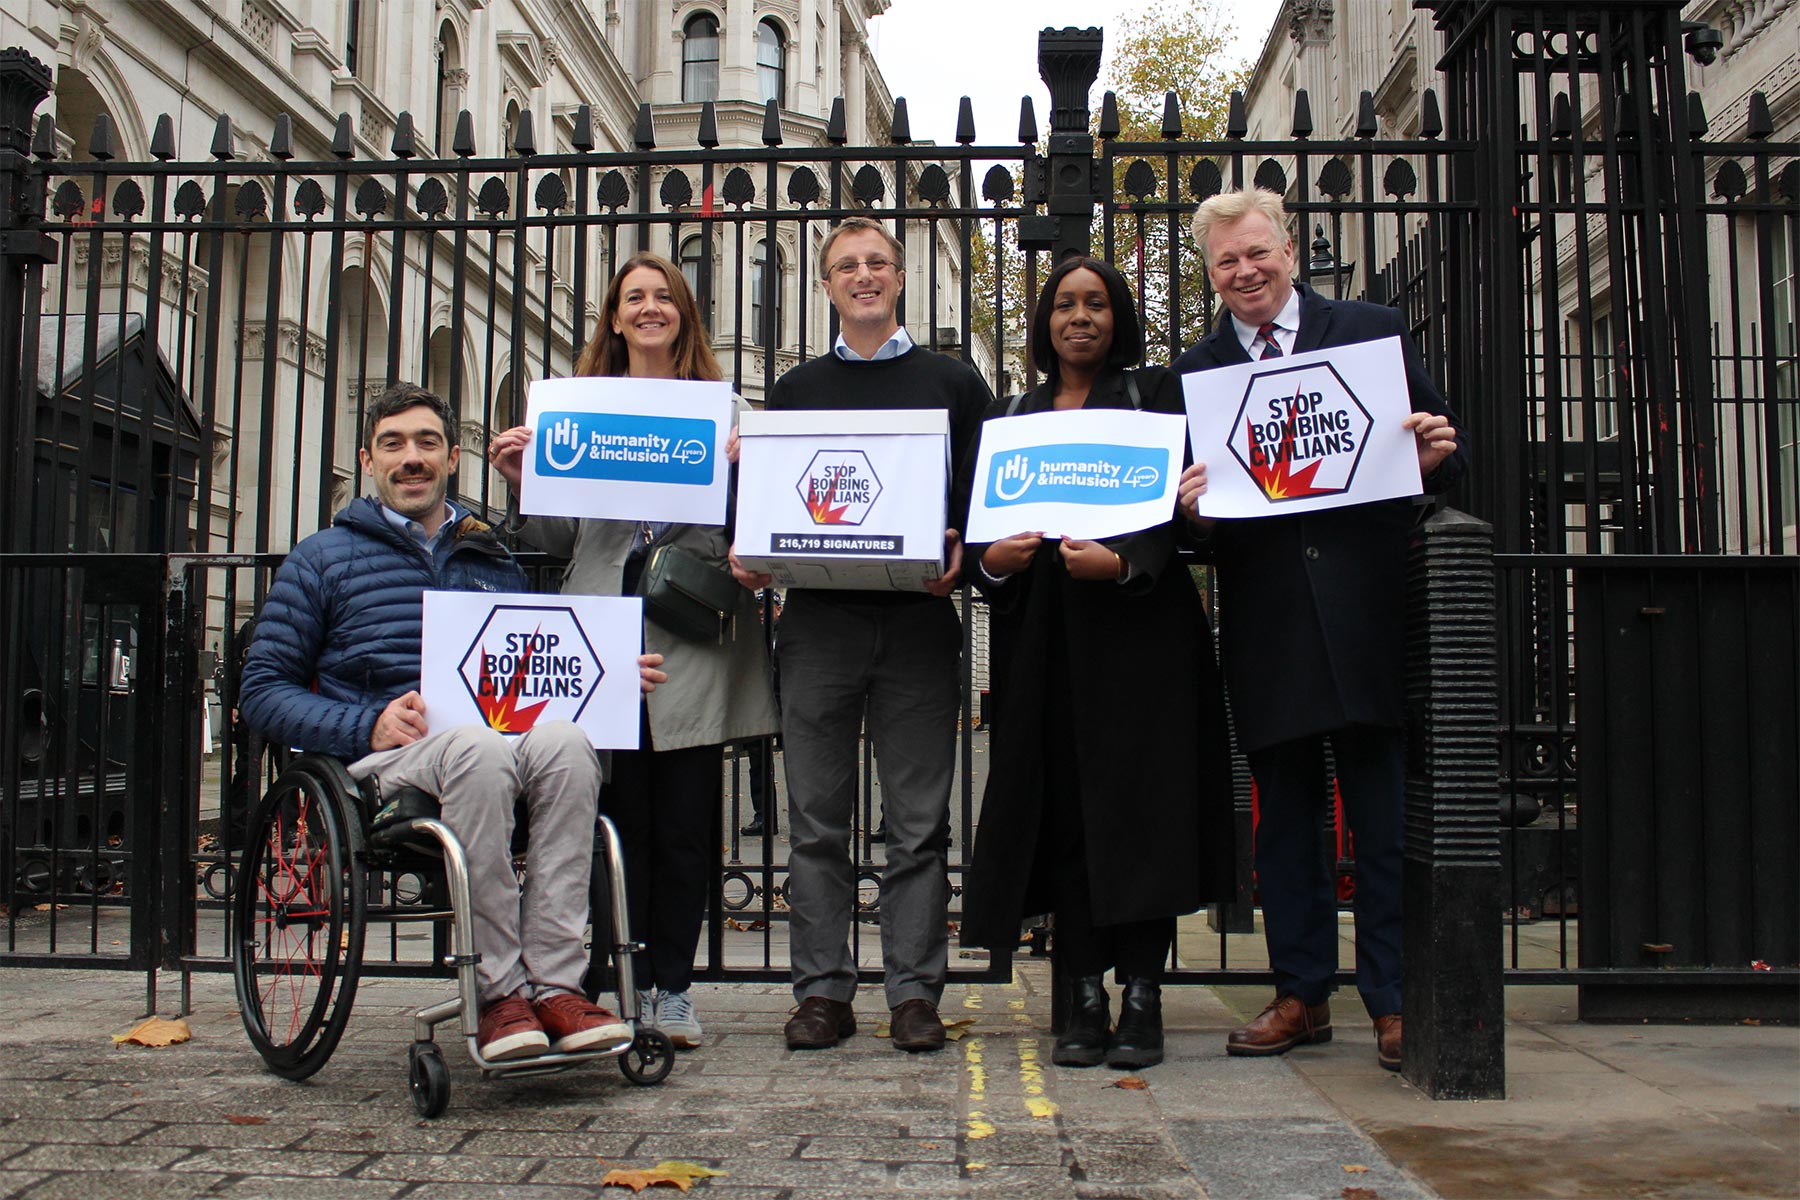 Campaigners from Humanity & Inclusion UK hand in the Stop Bombing Civilians petition at 10 Downing Street